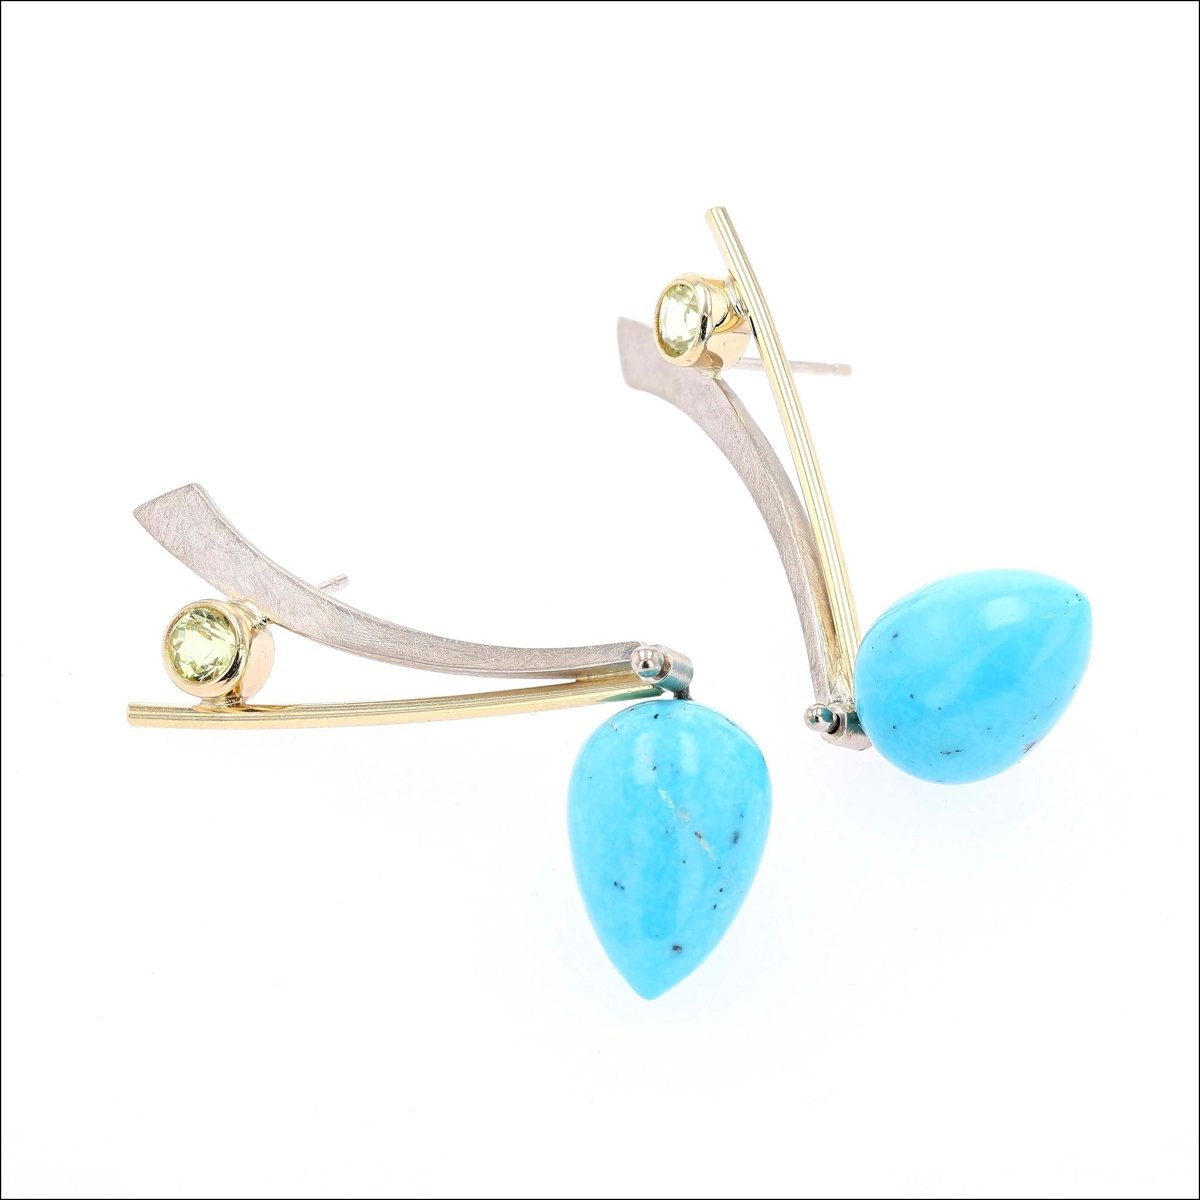 Turquoise Briolette Chrysoberyl Forged Earrings 18KY 14KW (Consignment) - JewelsmithEarrings